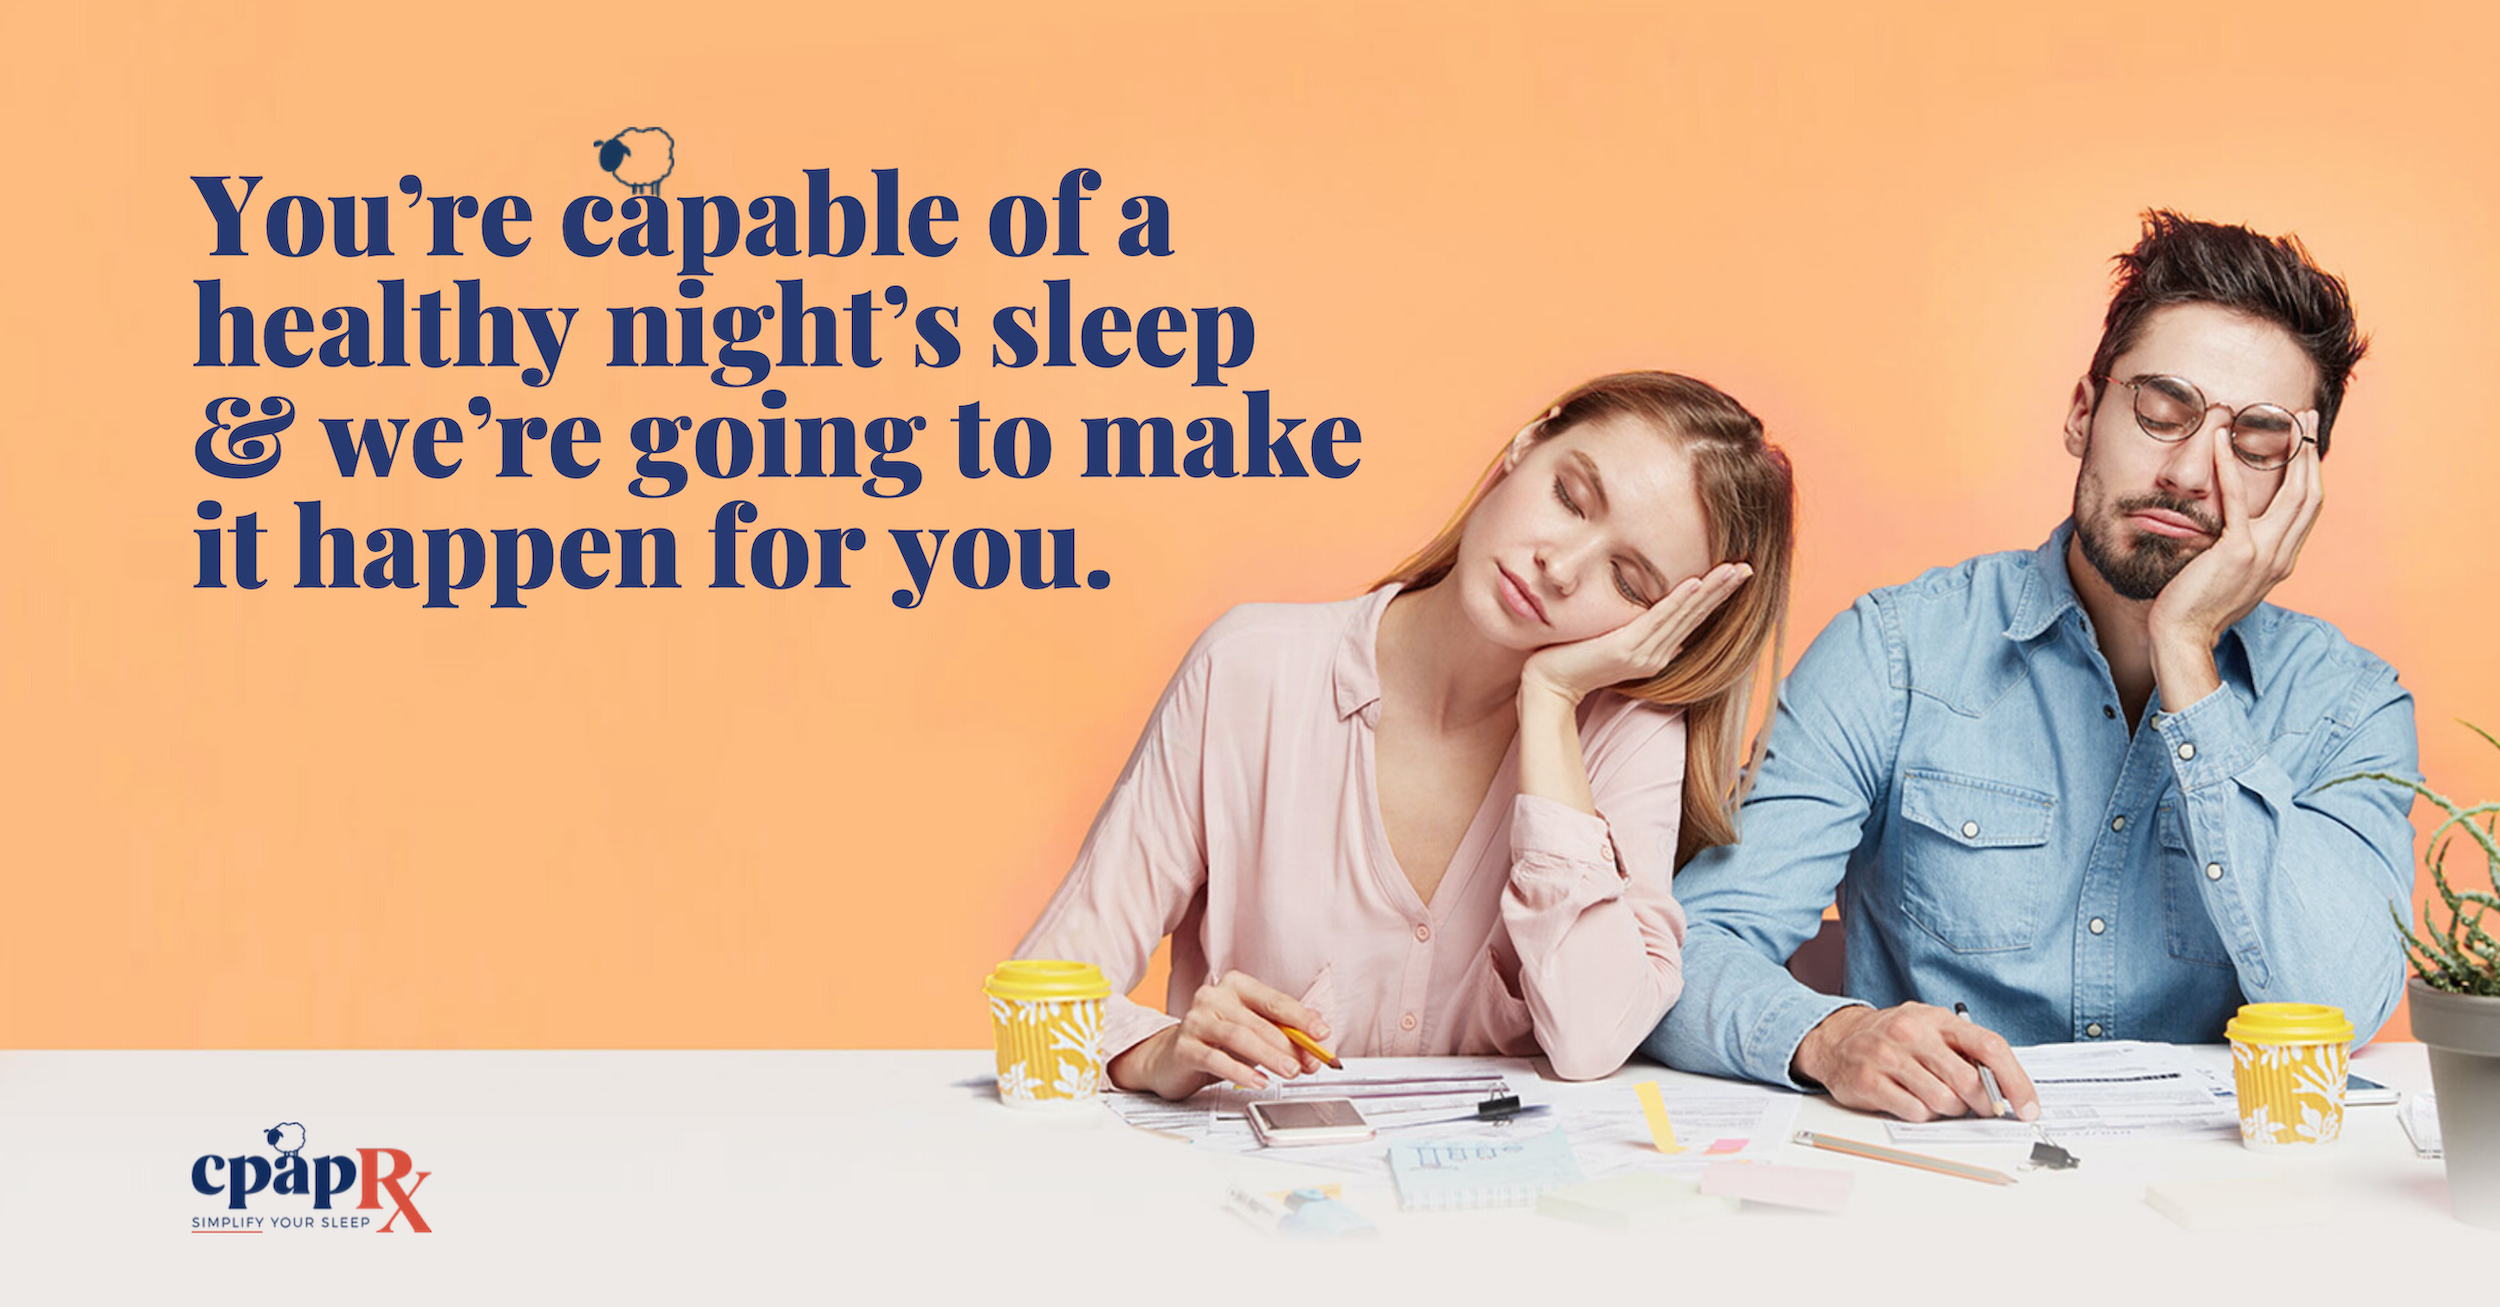 You’re capable of a healthy night’s sleep & cpapRX is going to make it happen for you.​